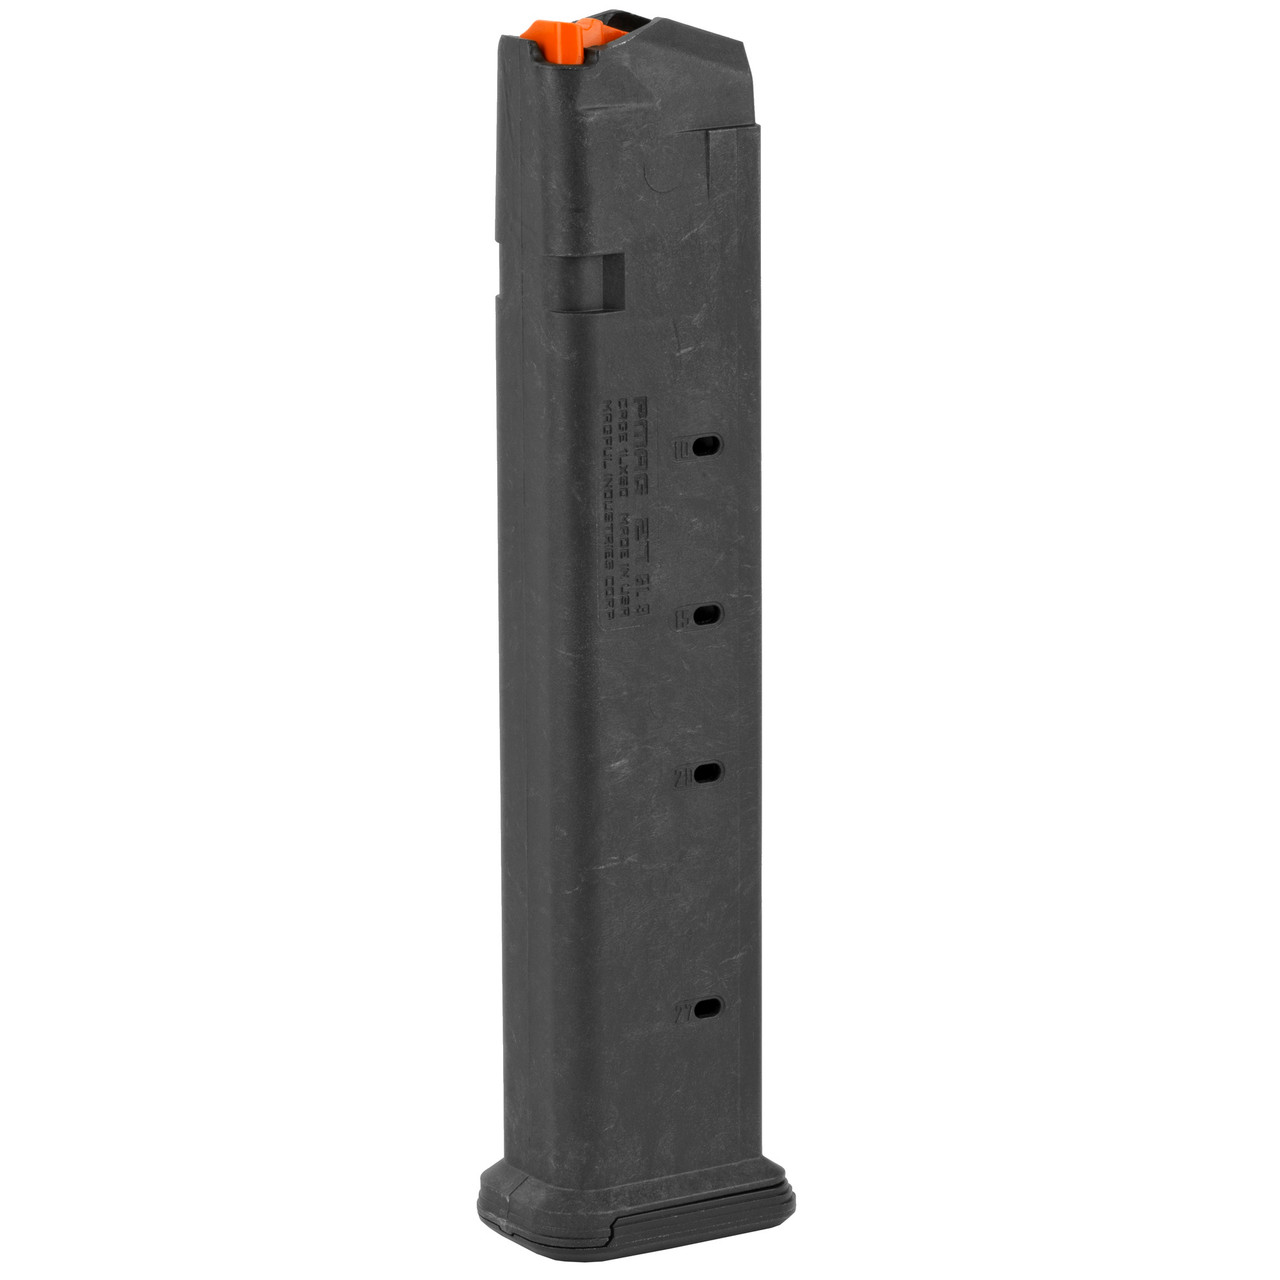 Magpul Industries MAG662-BLK Pmag For Glock 17 27rd Blk